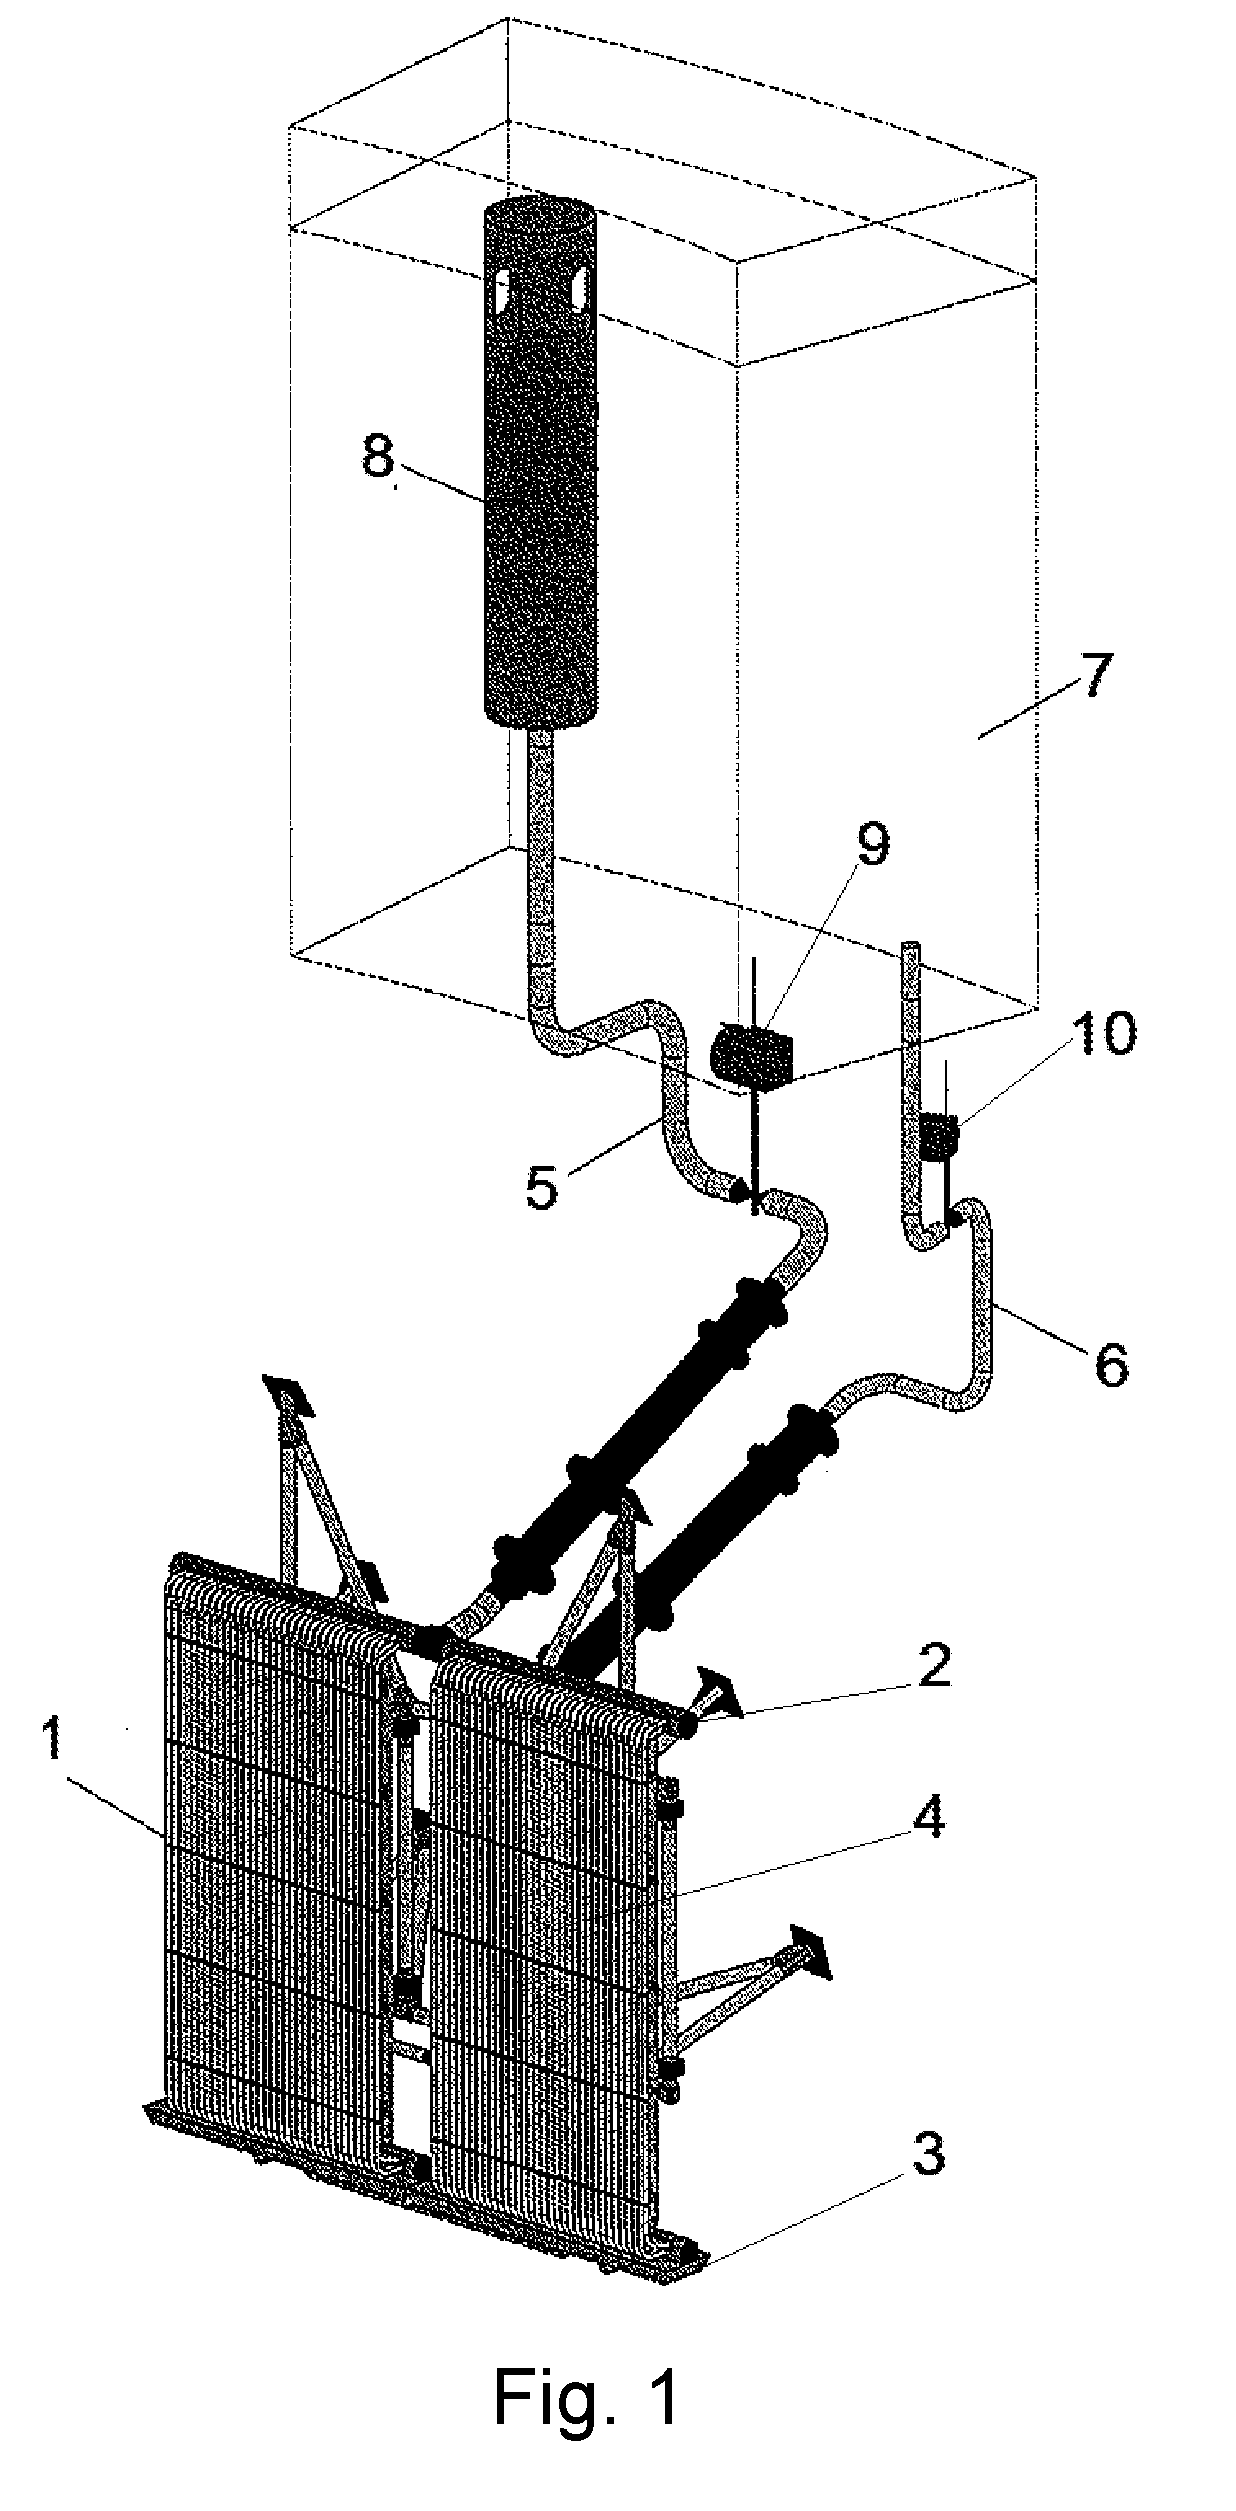 Containment Internal Passive Heat Removal System